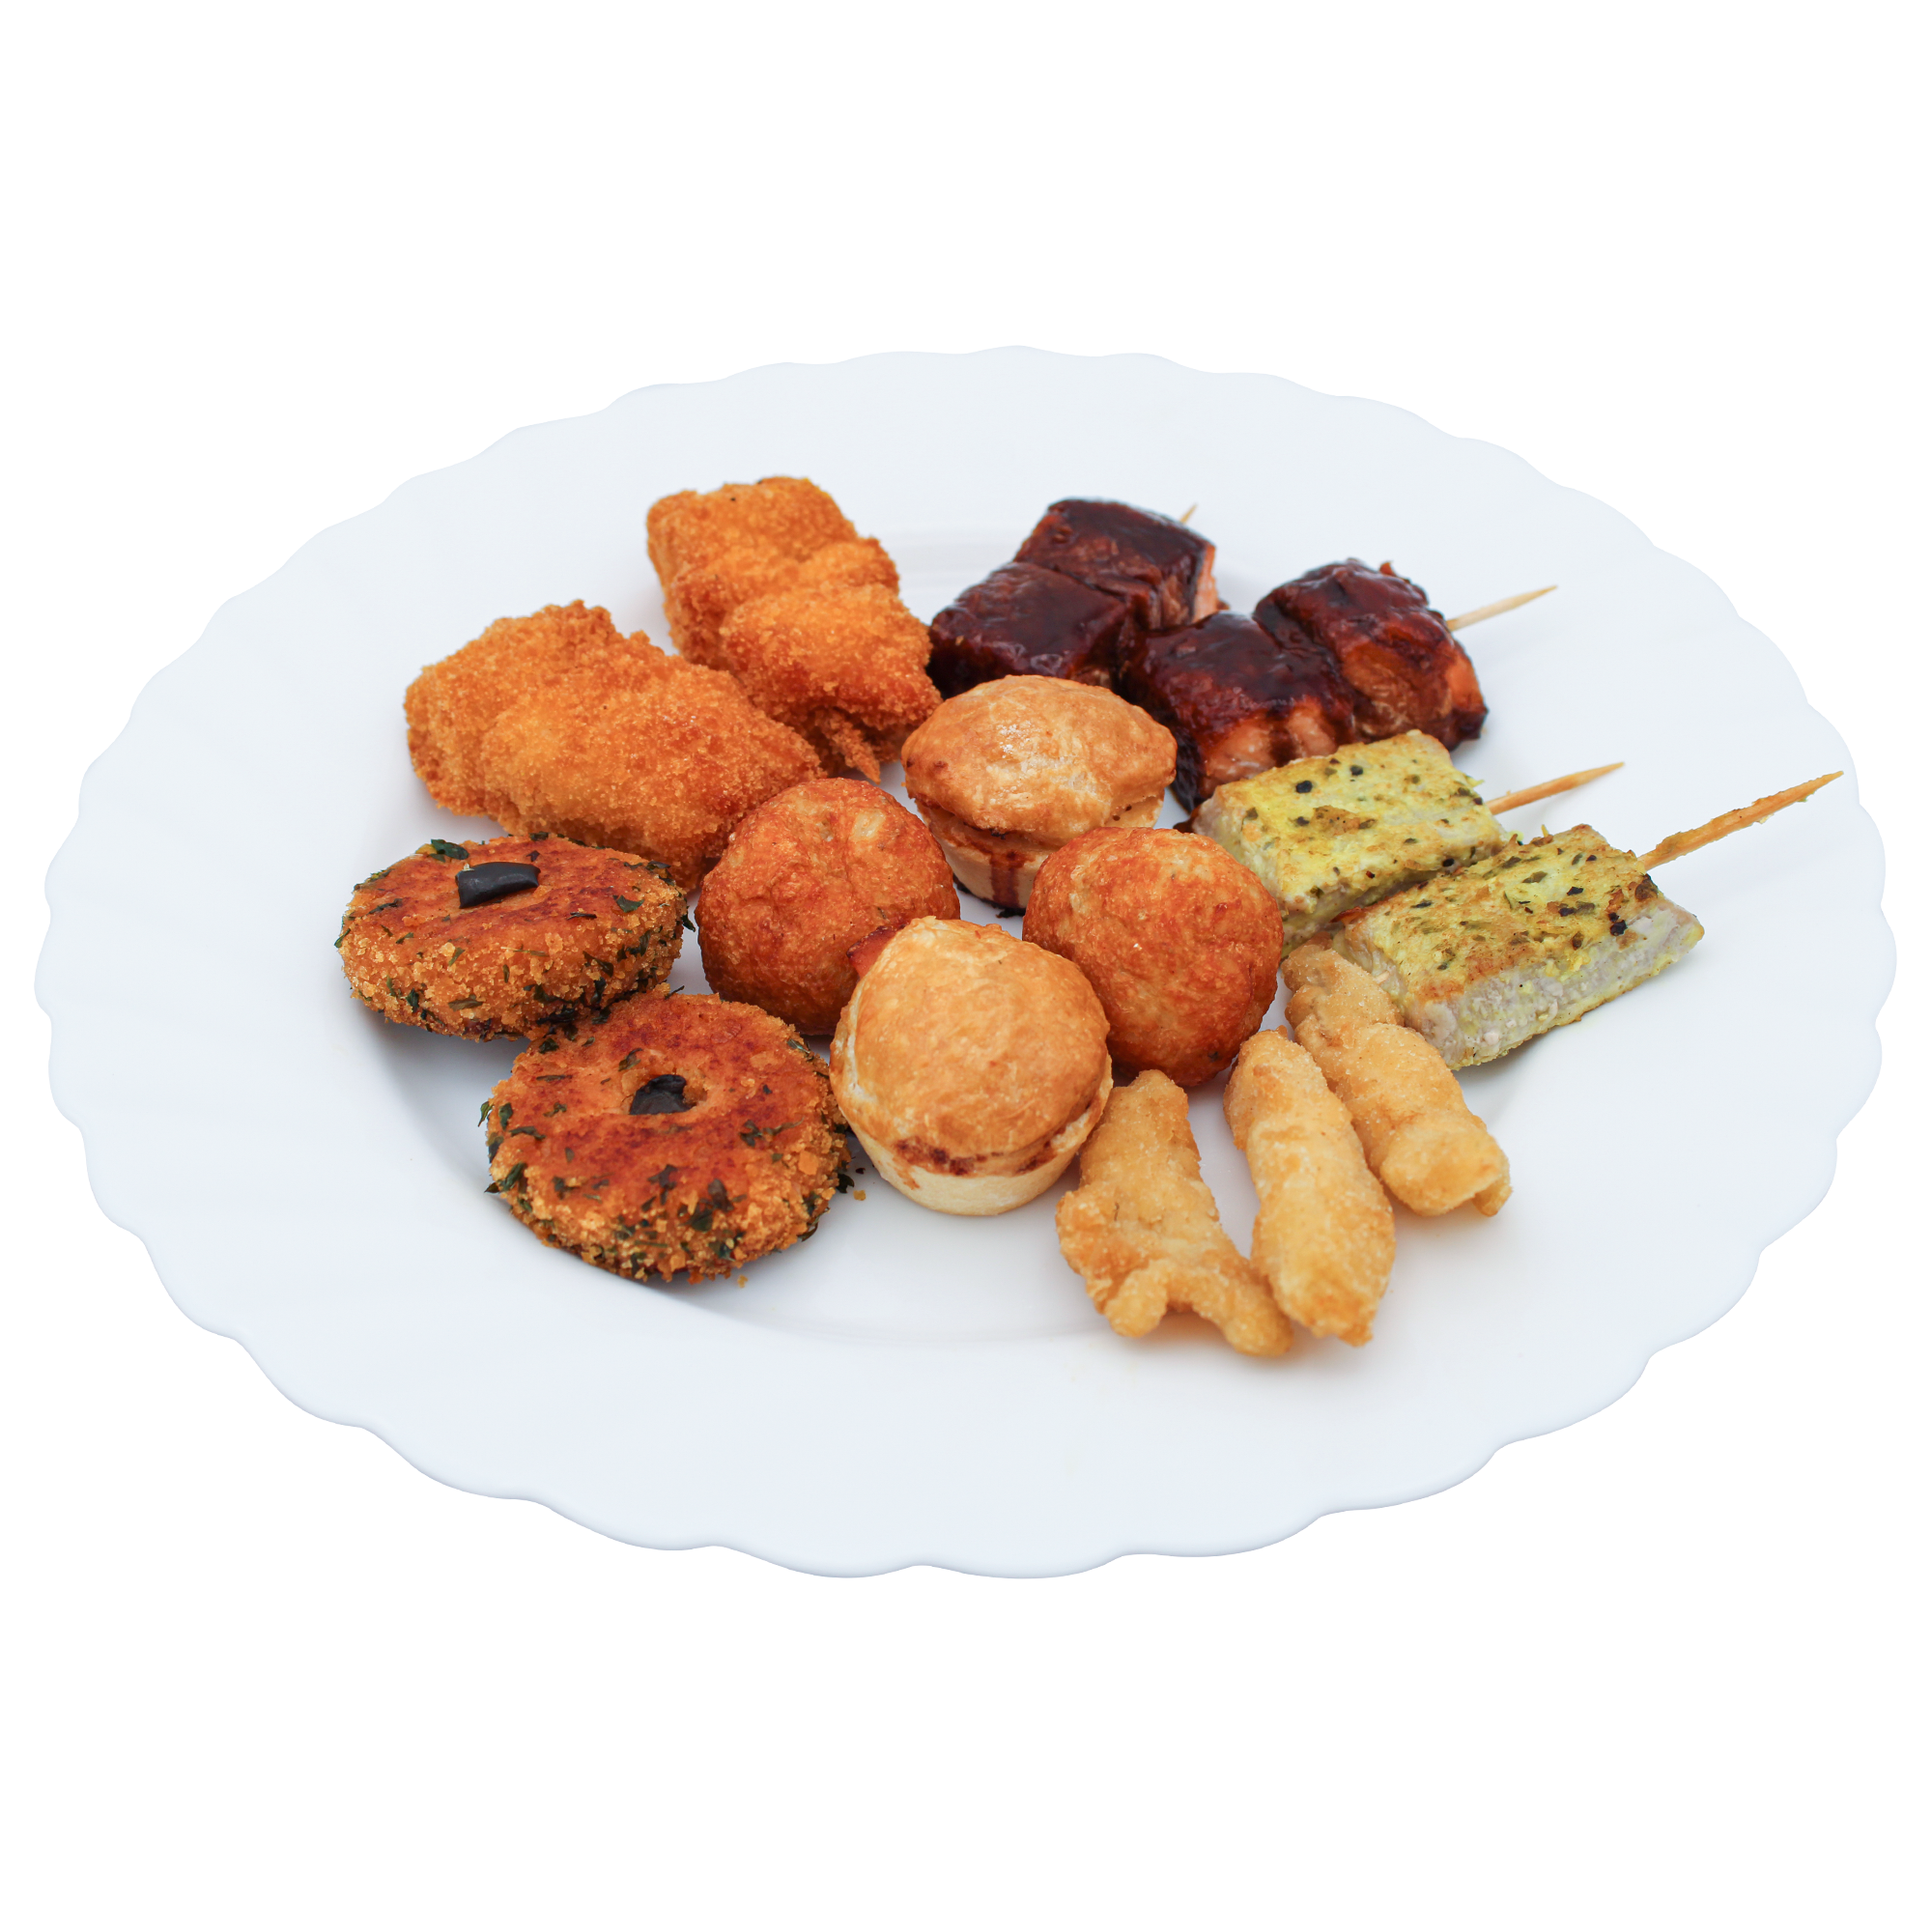 Cold Canapés to include chef's choice of Assorted Vegetarian options - 8 pcs (China)